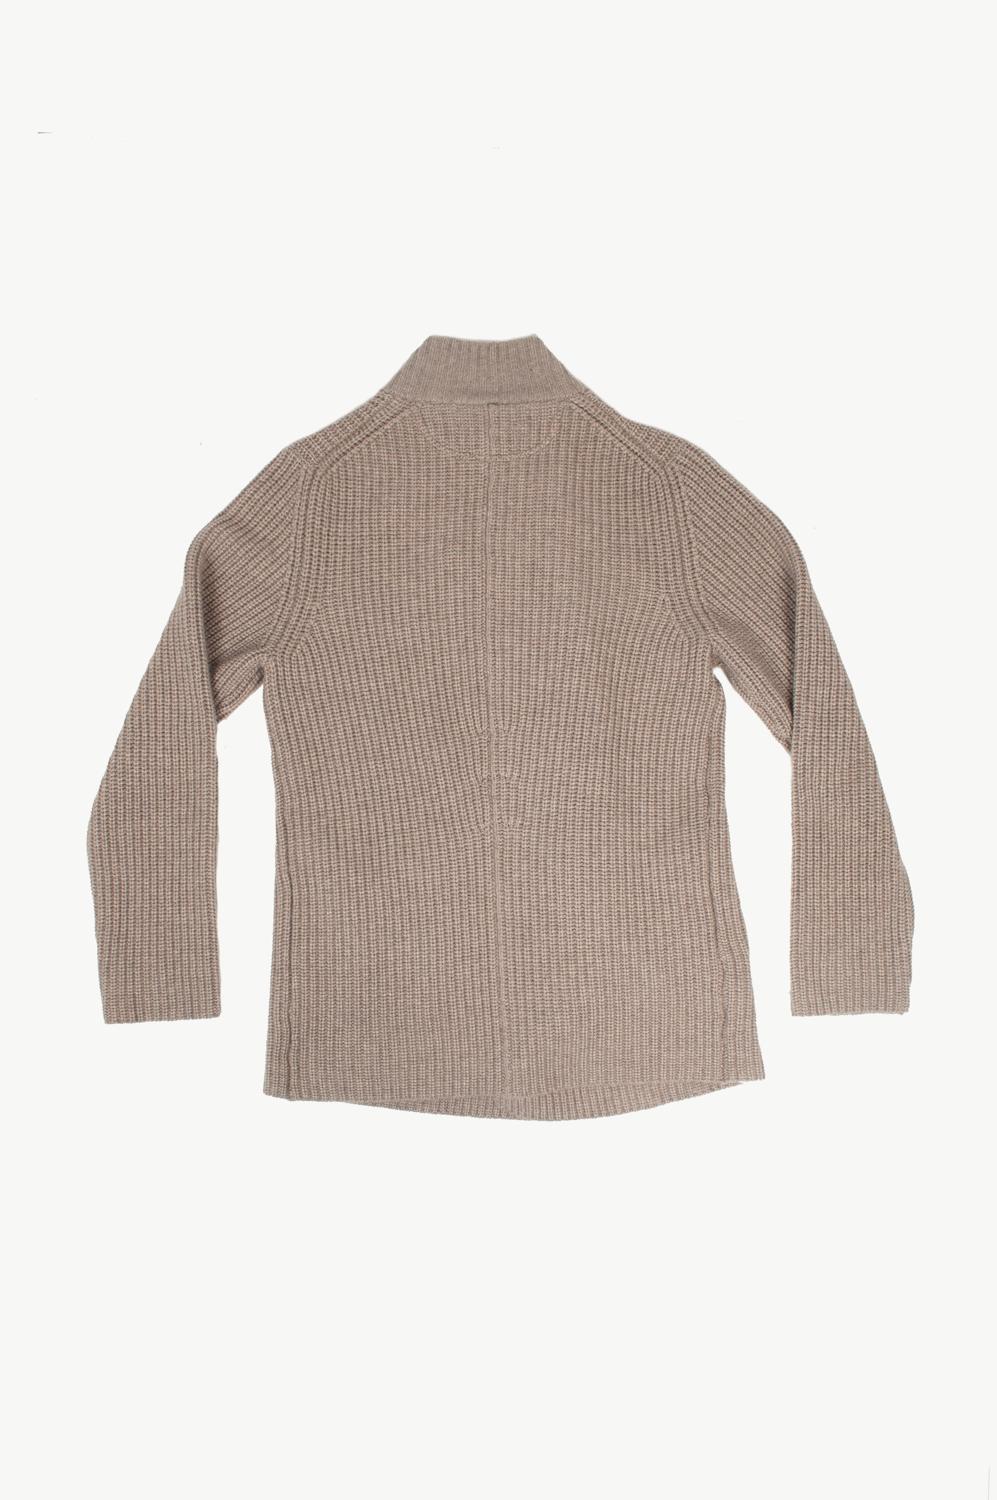 100% genuine Brunello Cucinelli Cardigan, S643
Color: sand
(An actual color may a bit vary due to individual computer screen interpretation)
Material: 100% cashmere
Tag size: ITA48/Medium
This sweater is great quality item. Rate 9 of 10, excellent